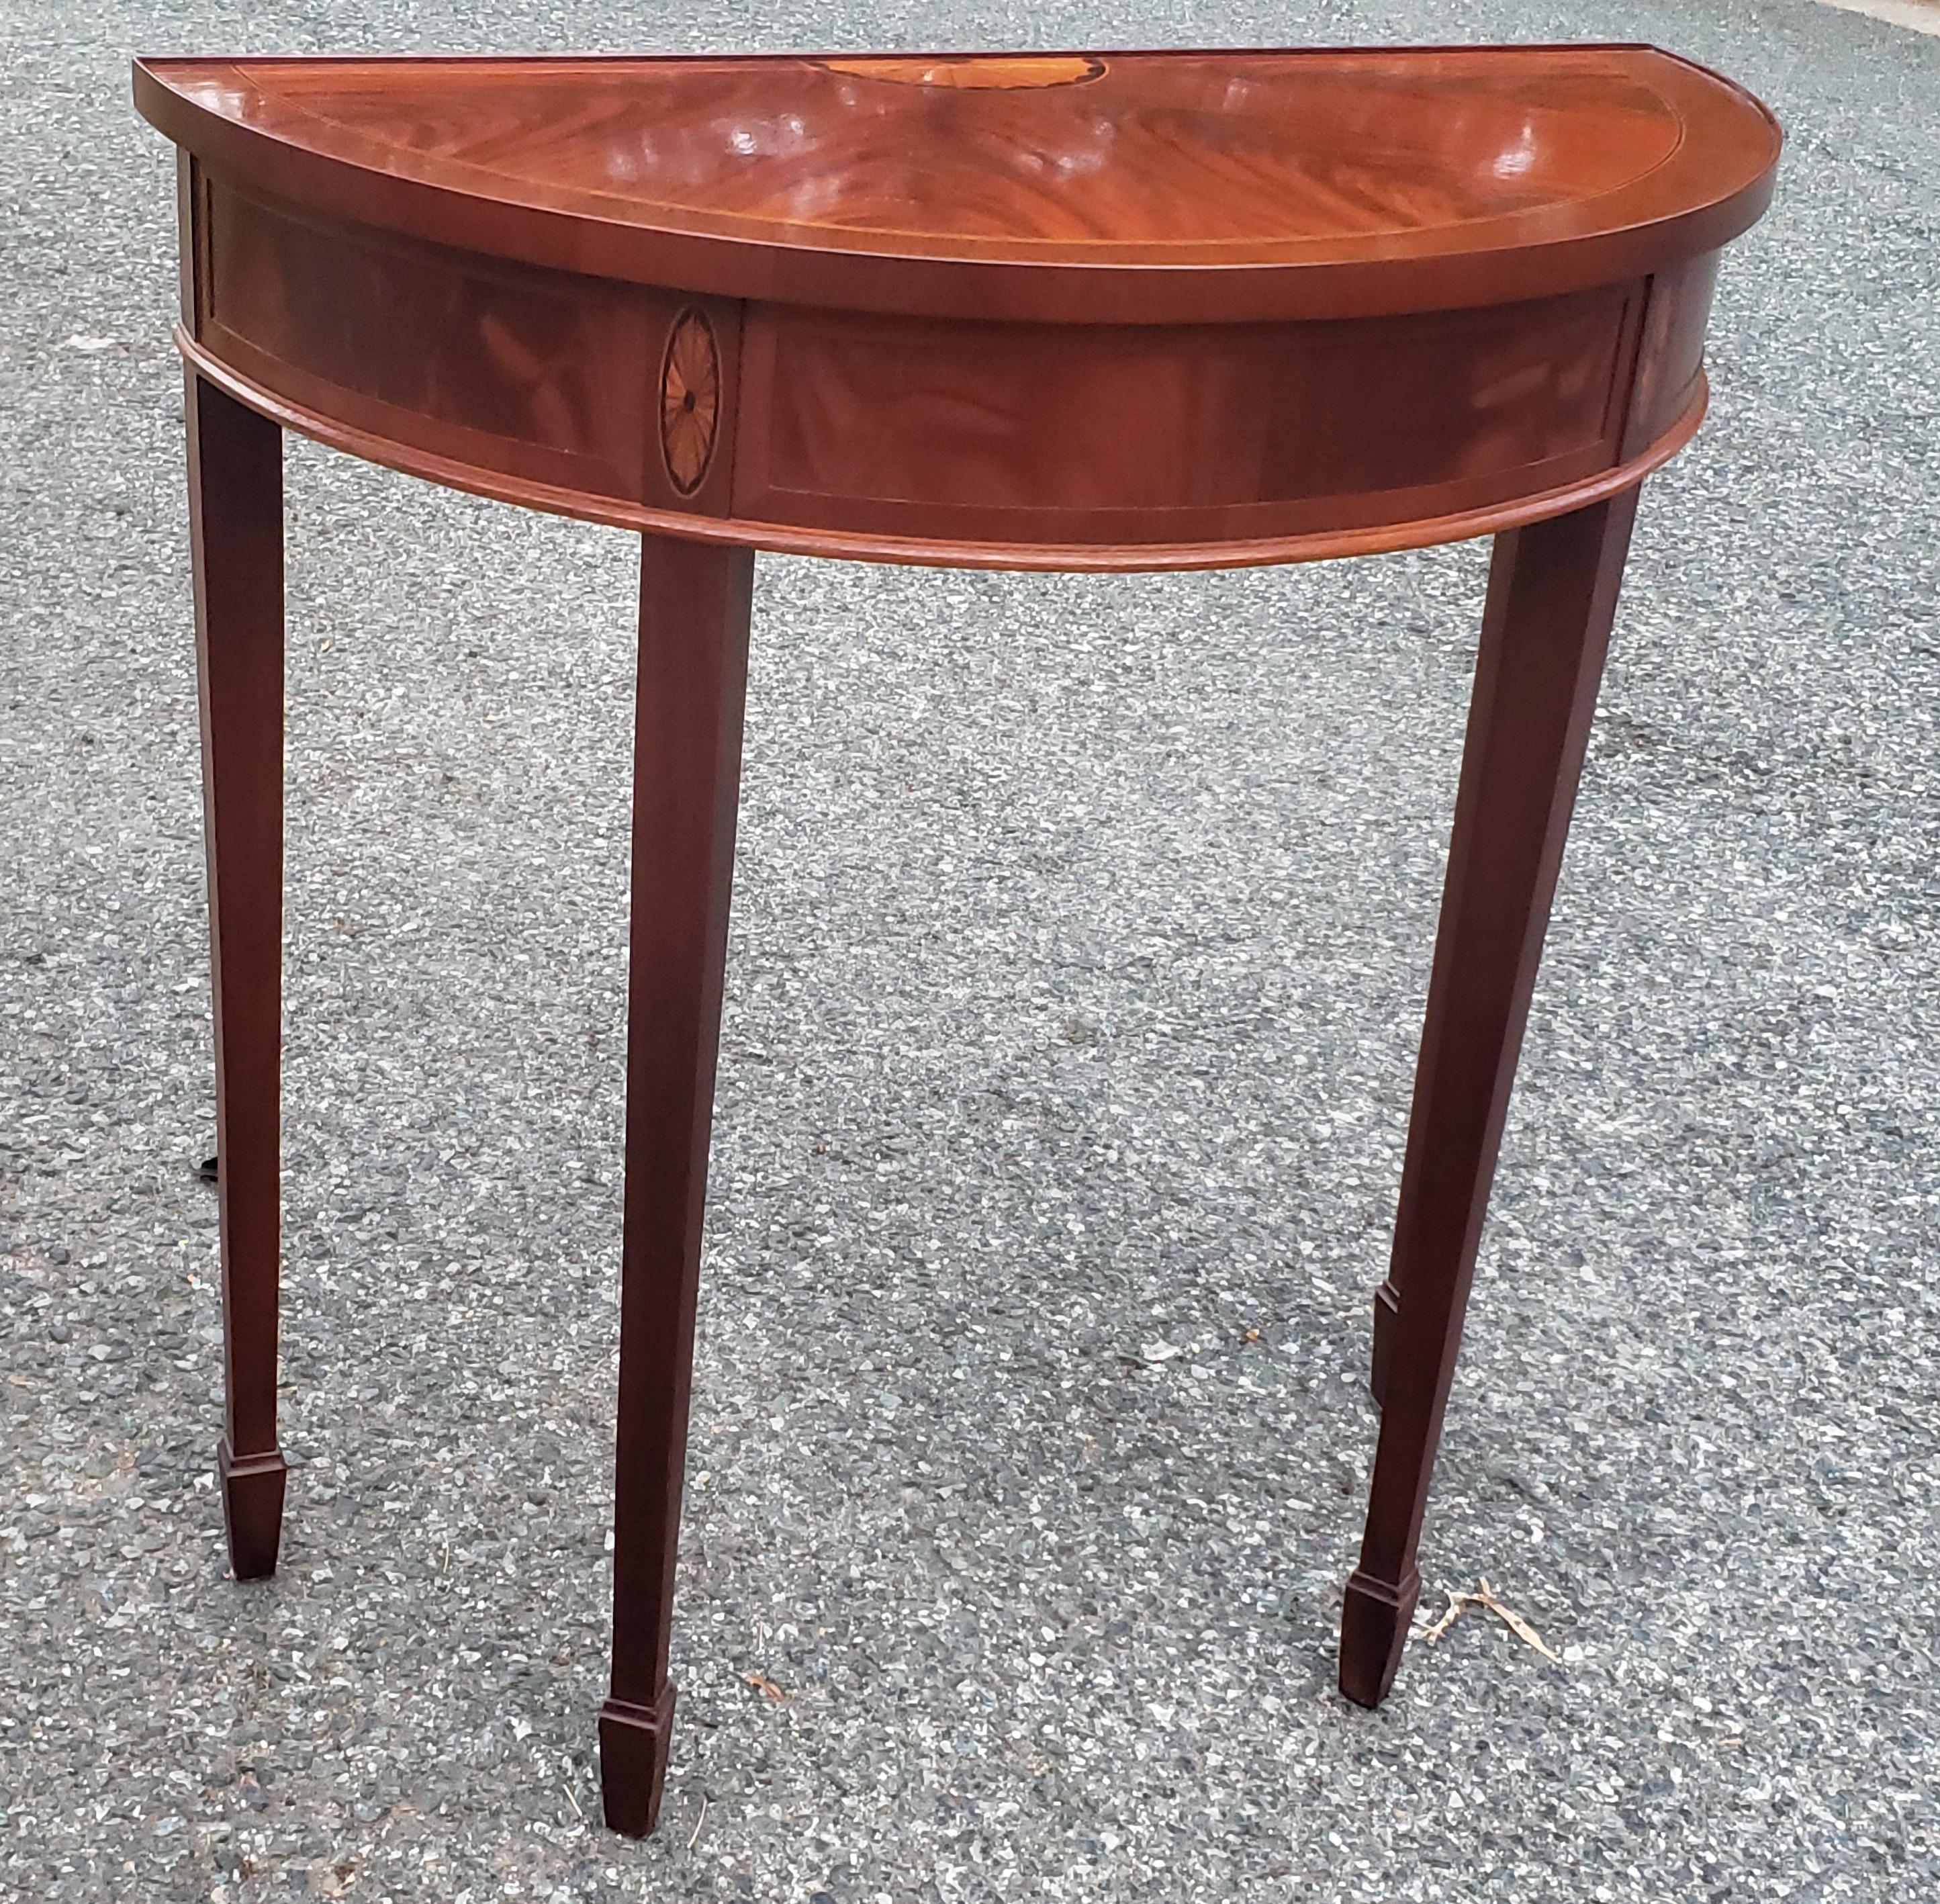 From Hekman Furniture Copley Place Collection is this well proportioned swirl mahogany demilune console or hall table in great vintage condition. Measures 30